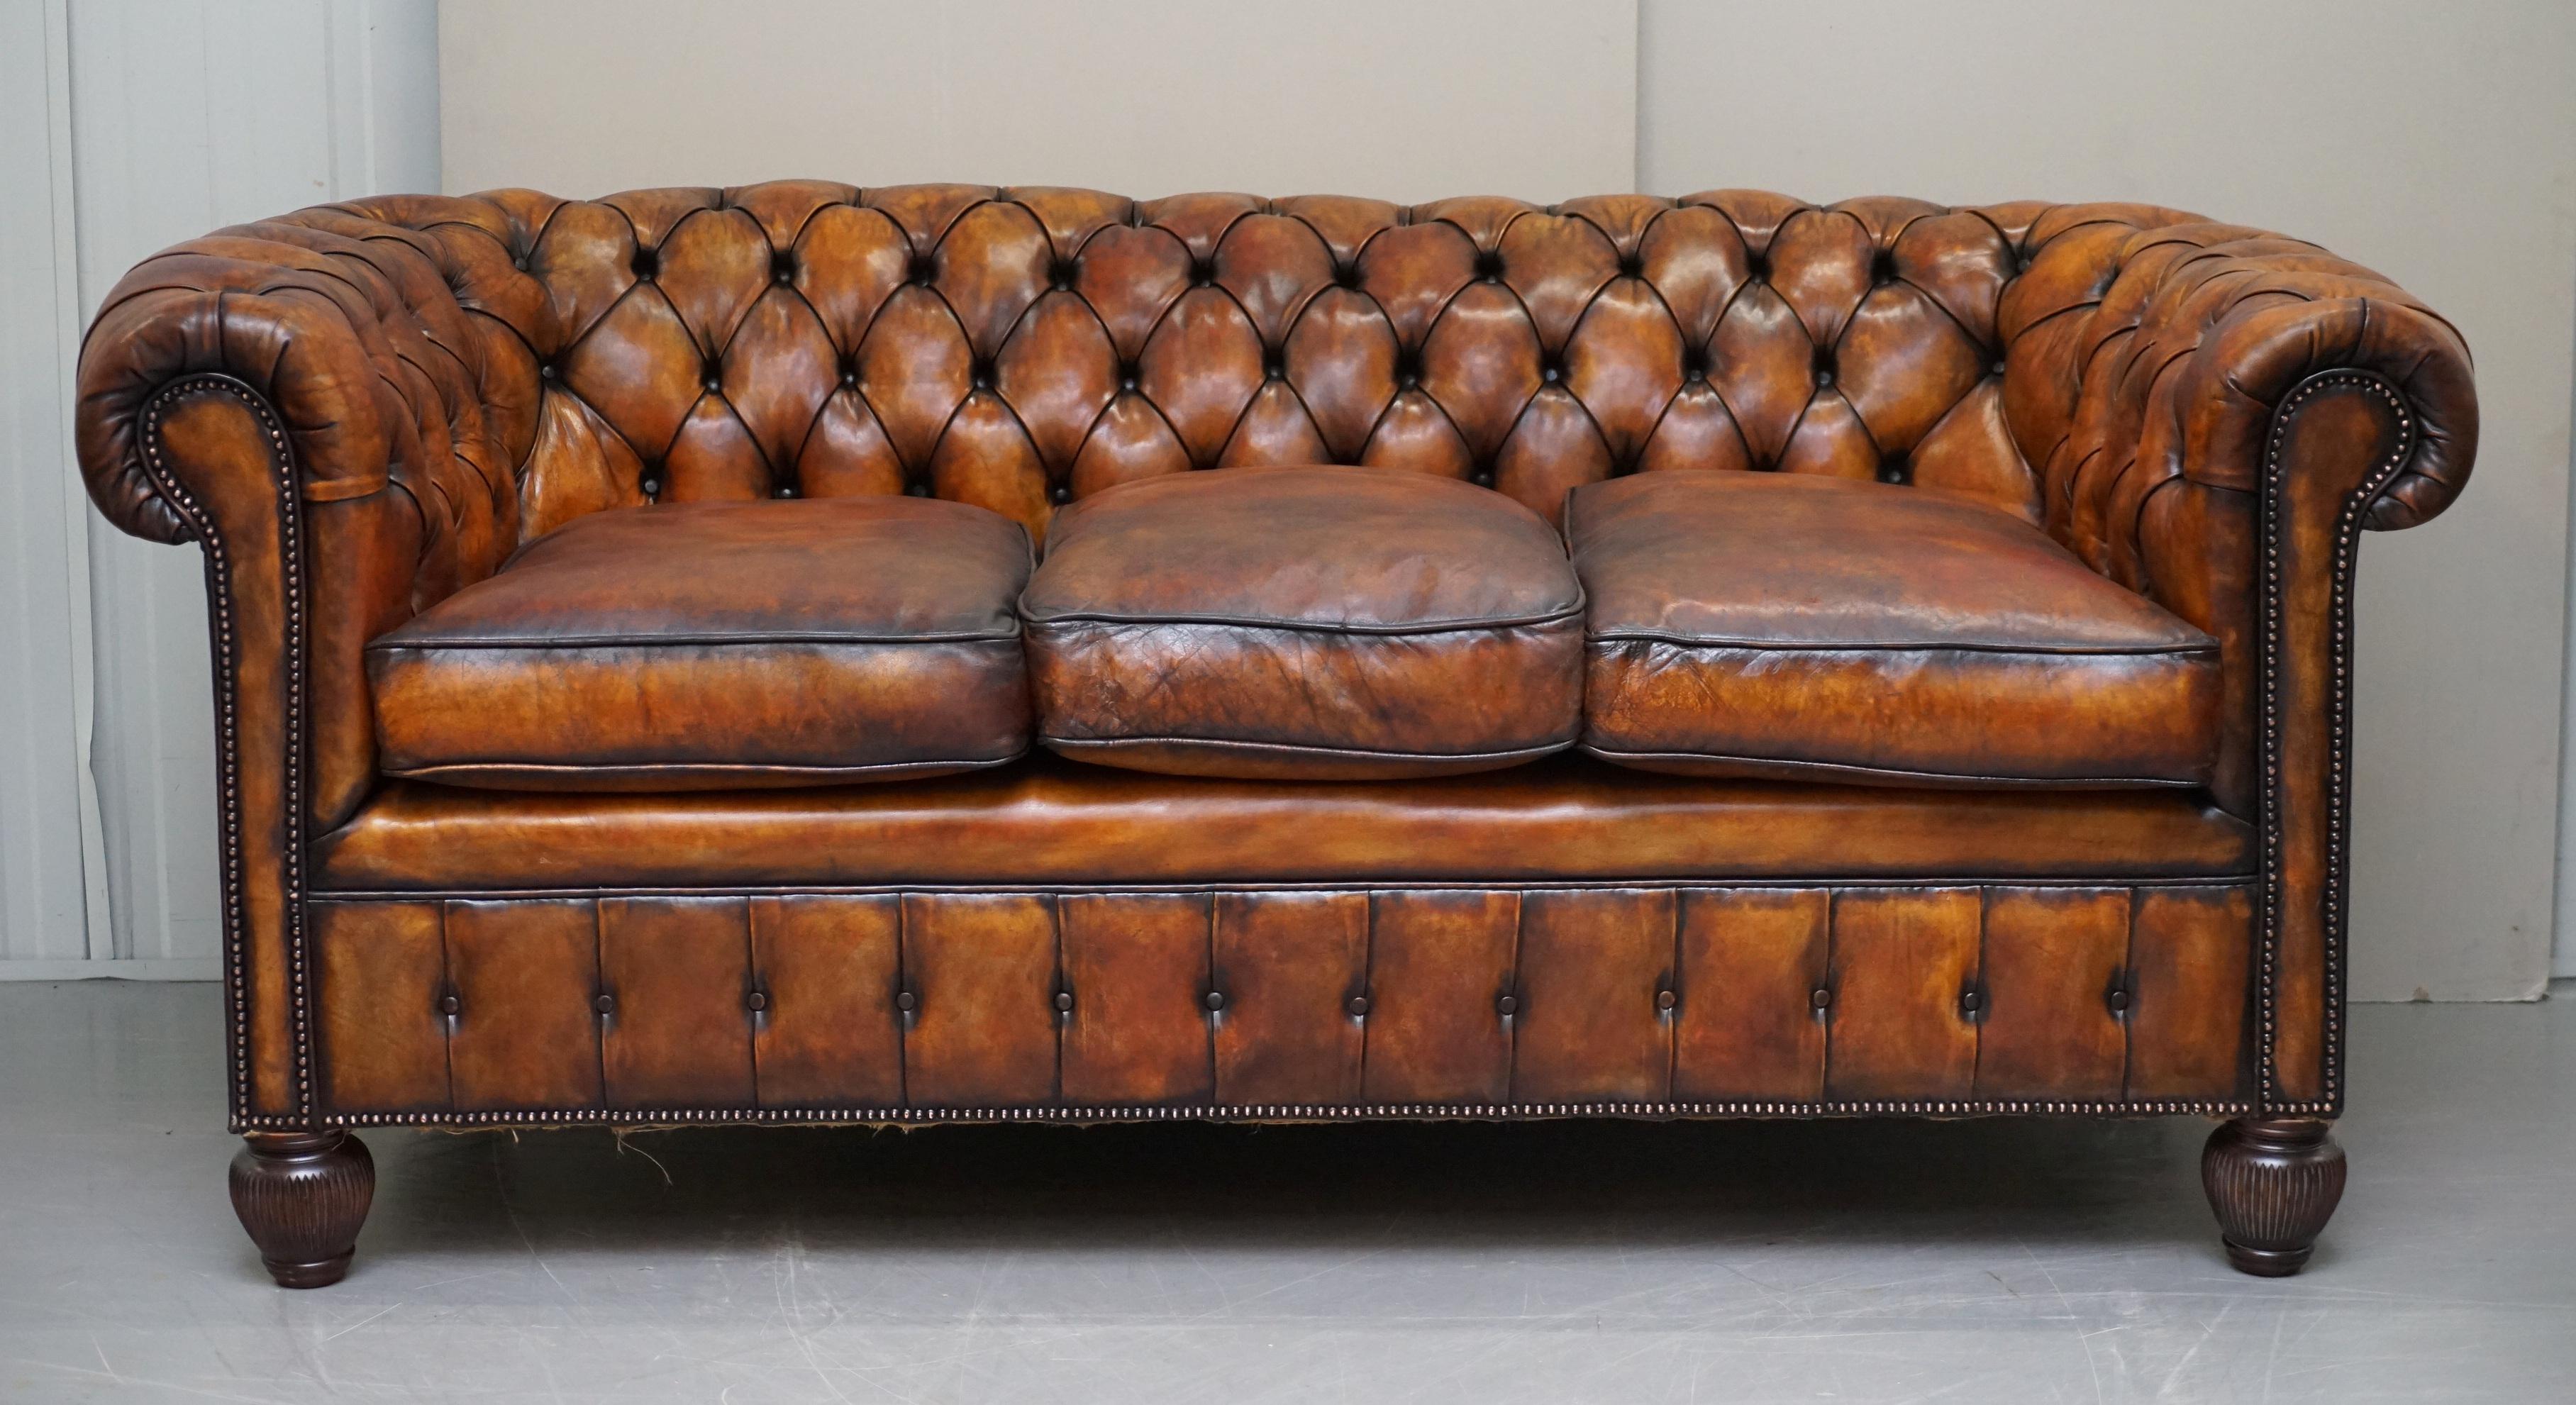 We are delighted to offer for sale this stunning fully restored circa 1900 hand dyed whiskey brown leather Chesterfield sofa with feather filled cushions

This sofa is one of the nicest I have seen in terms of original patina, it looks and feels